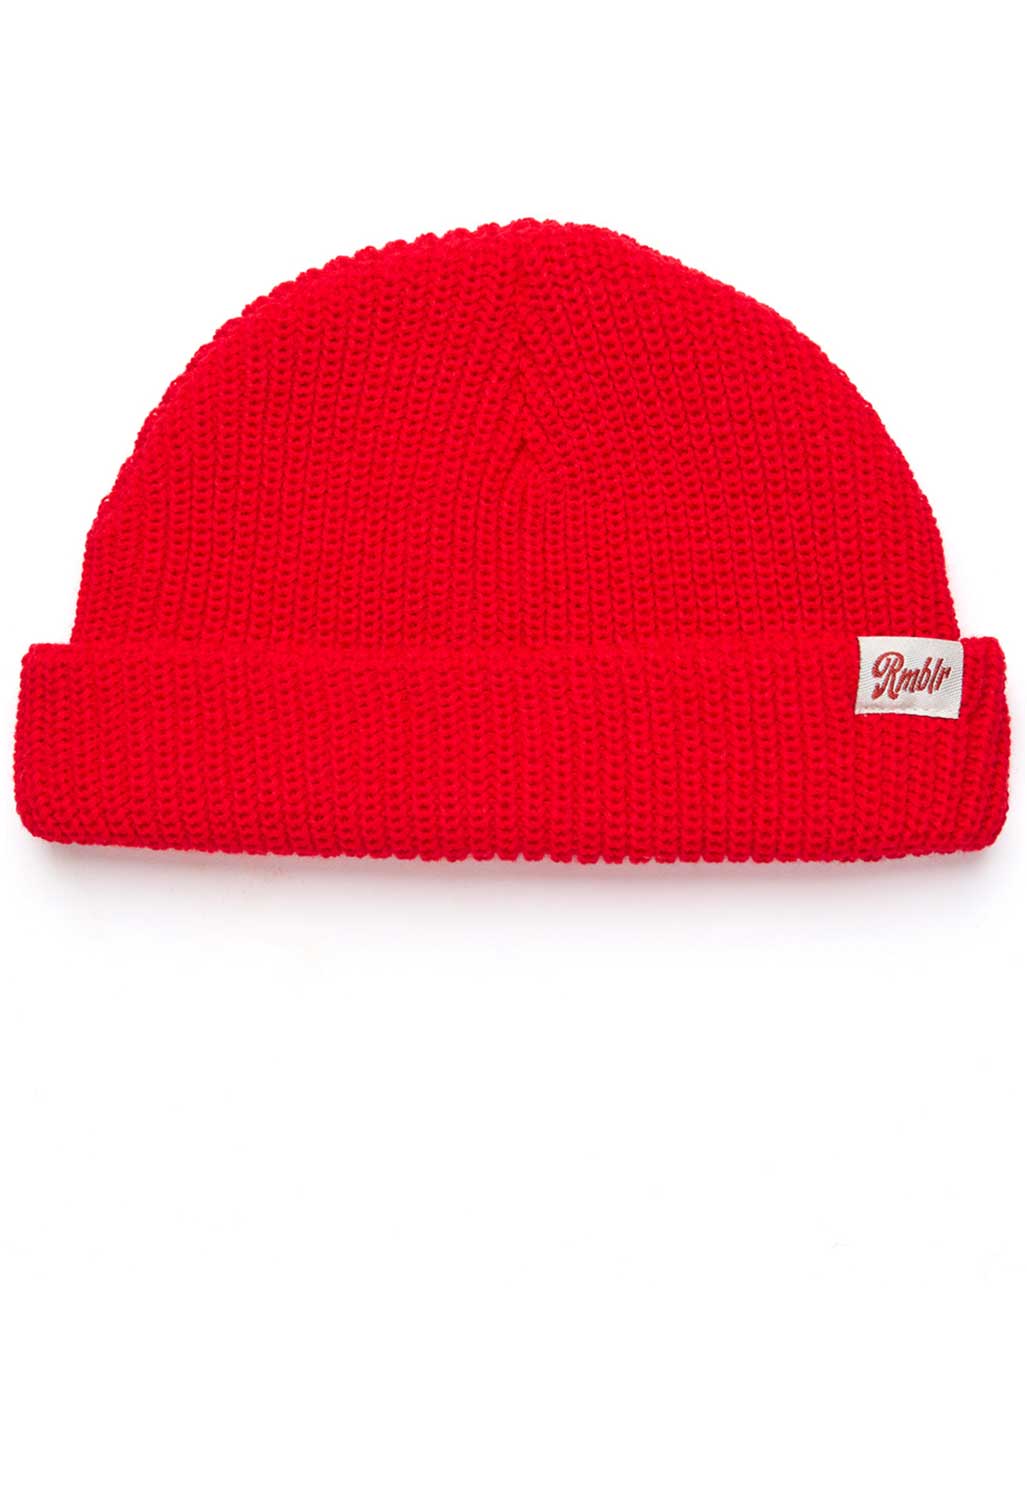 Product image of RMBLR Smithy Beanie